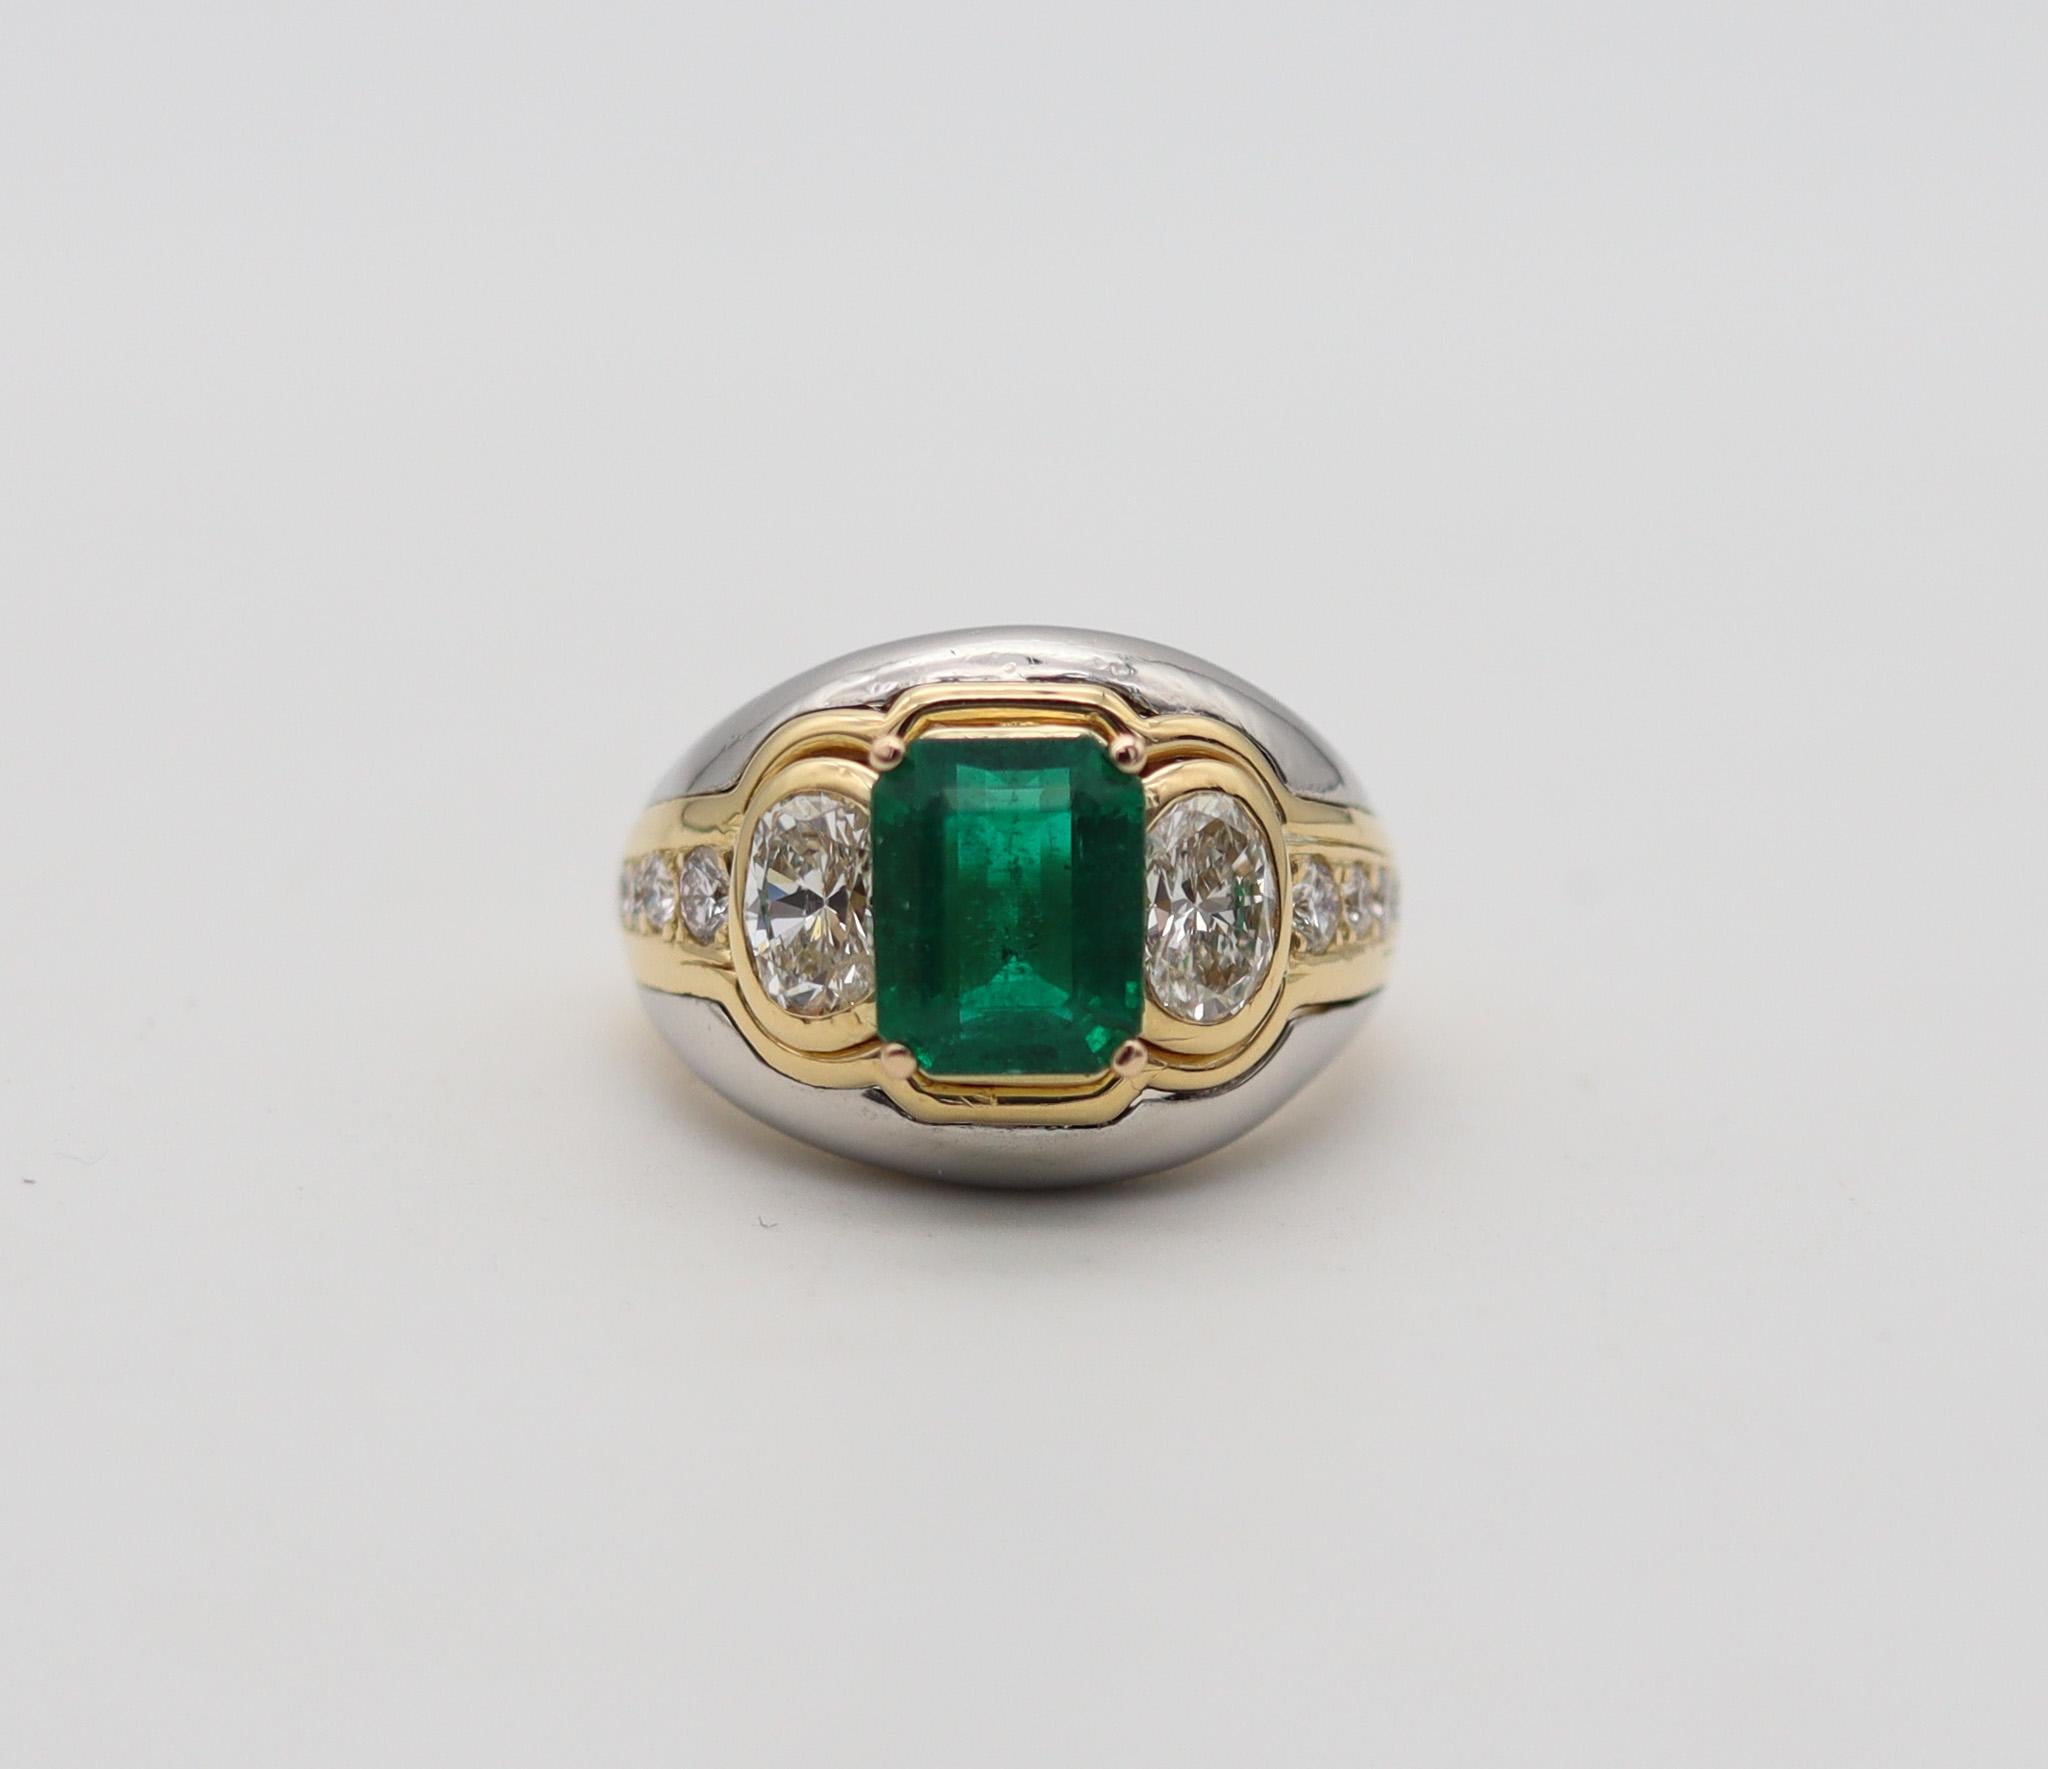 Brilliant Cut Bvlgari Roma Cocktail Ring In 18Kt Gold With 4.58 Ctw In Diamonds And Emerald For Sale